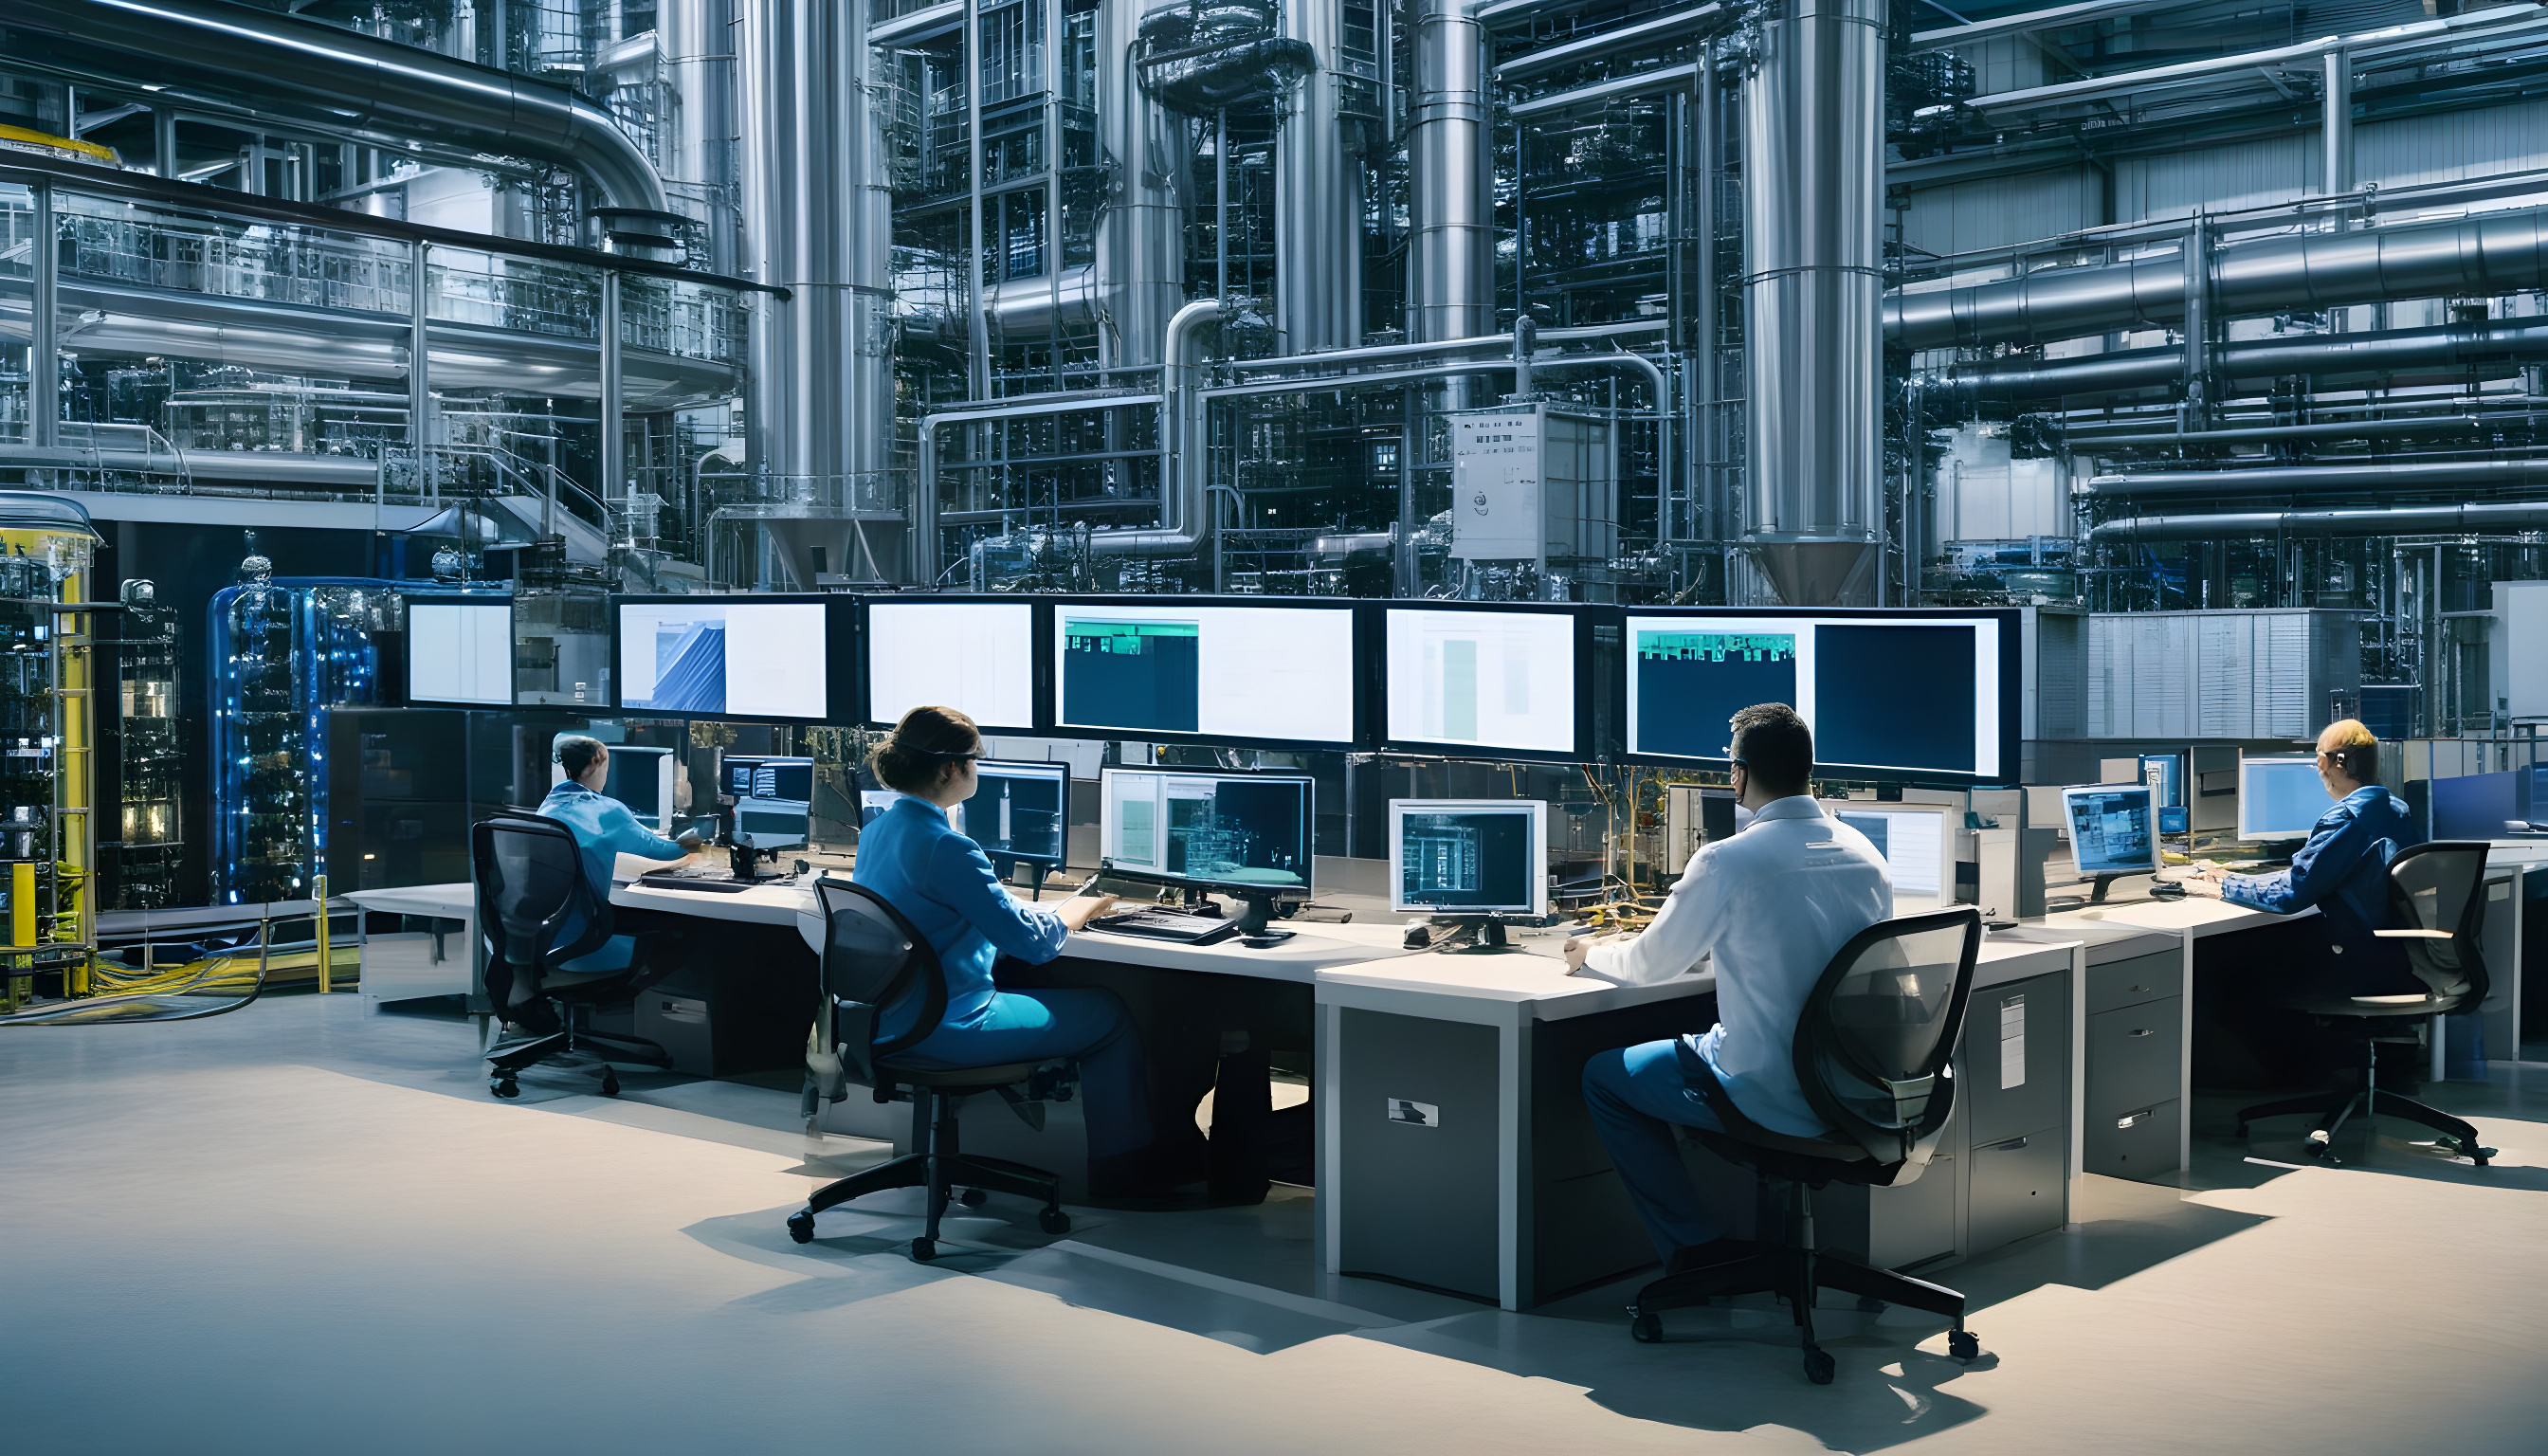 create-an-image-of-people-working-at-a-chemical-plant-using-computers